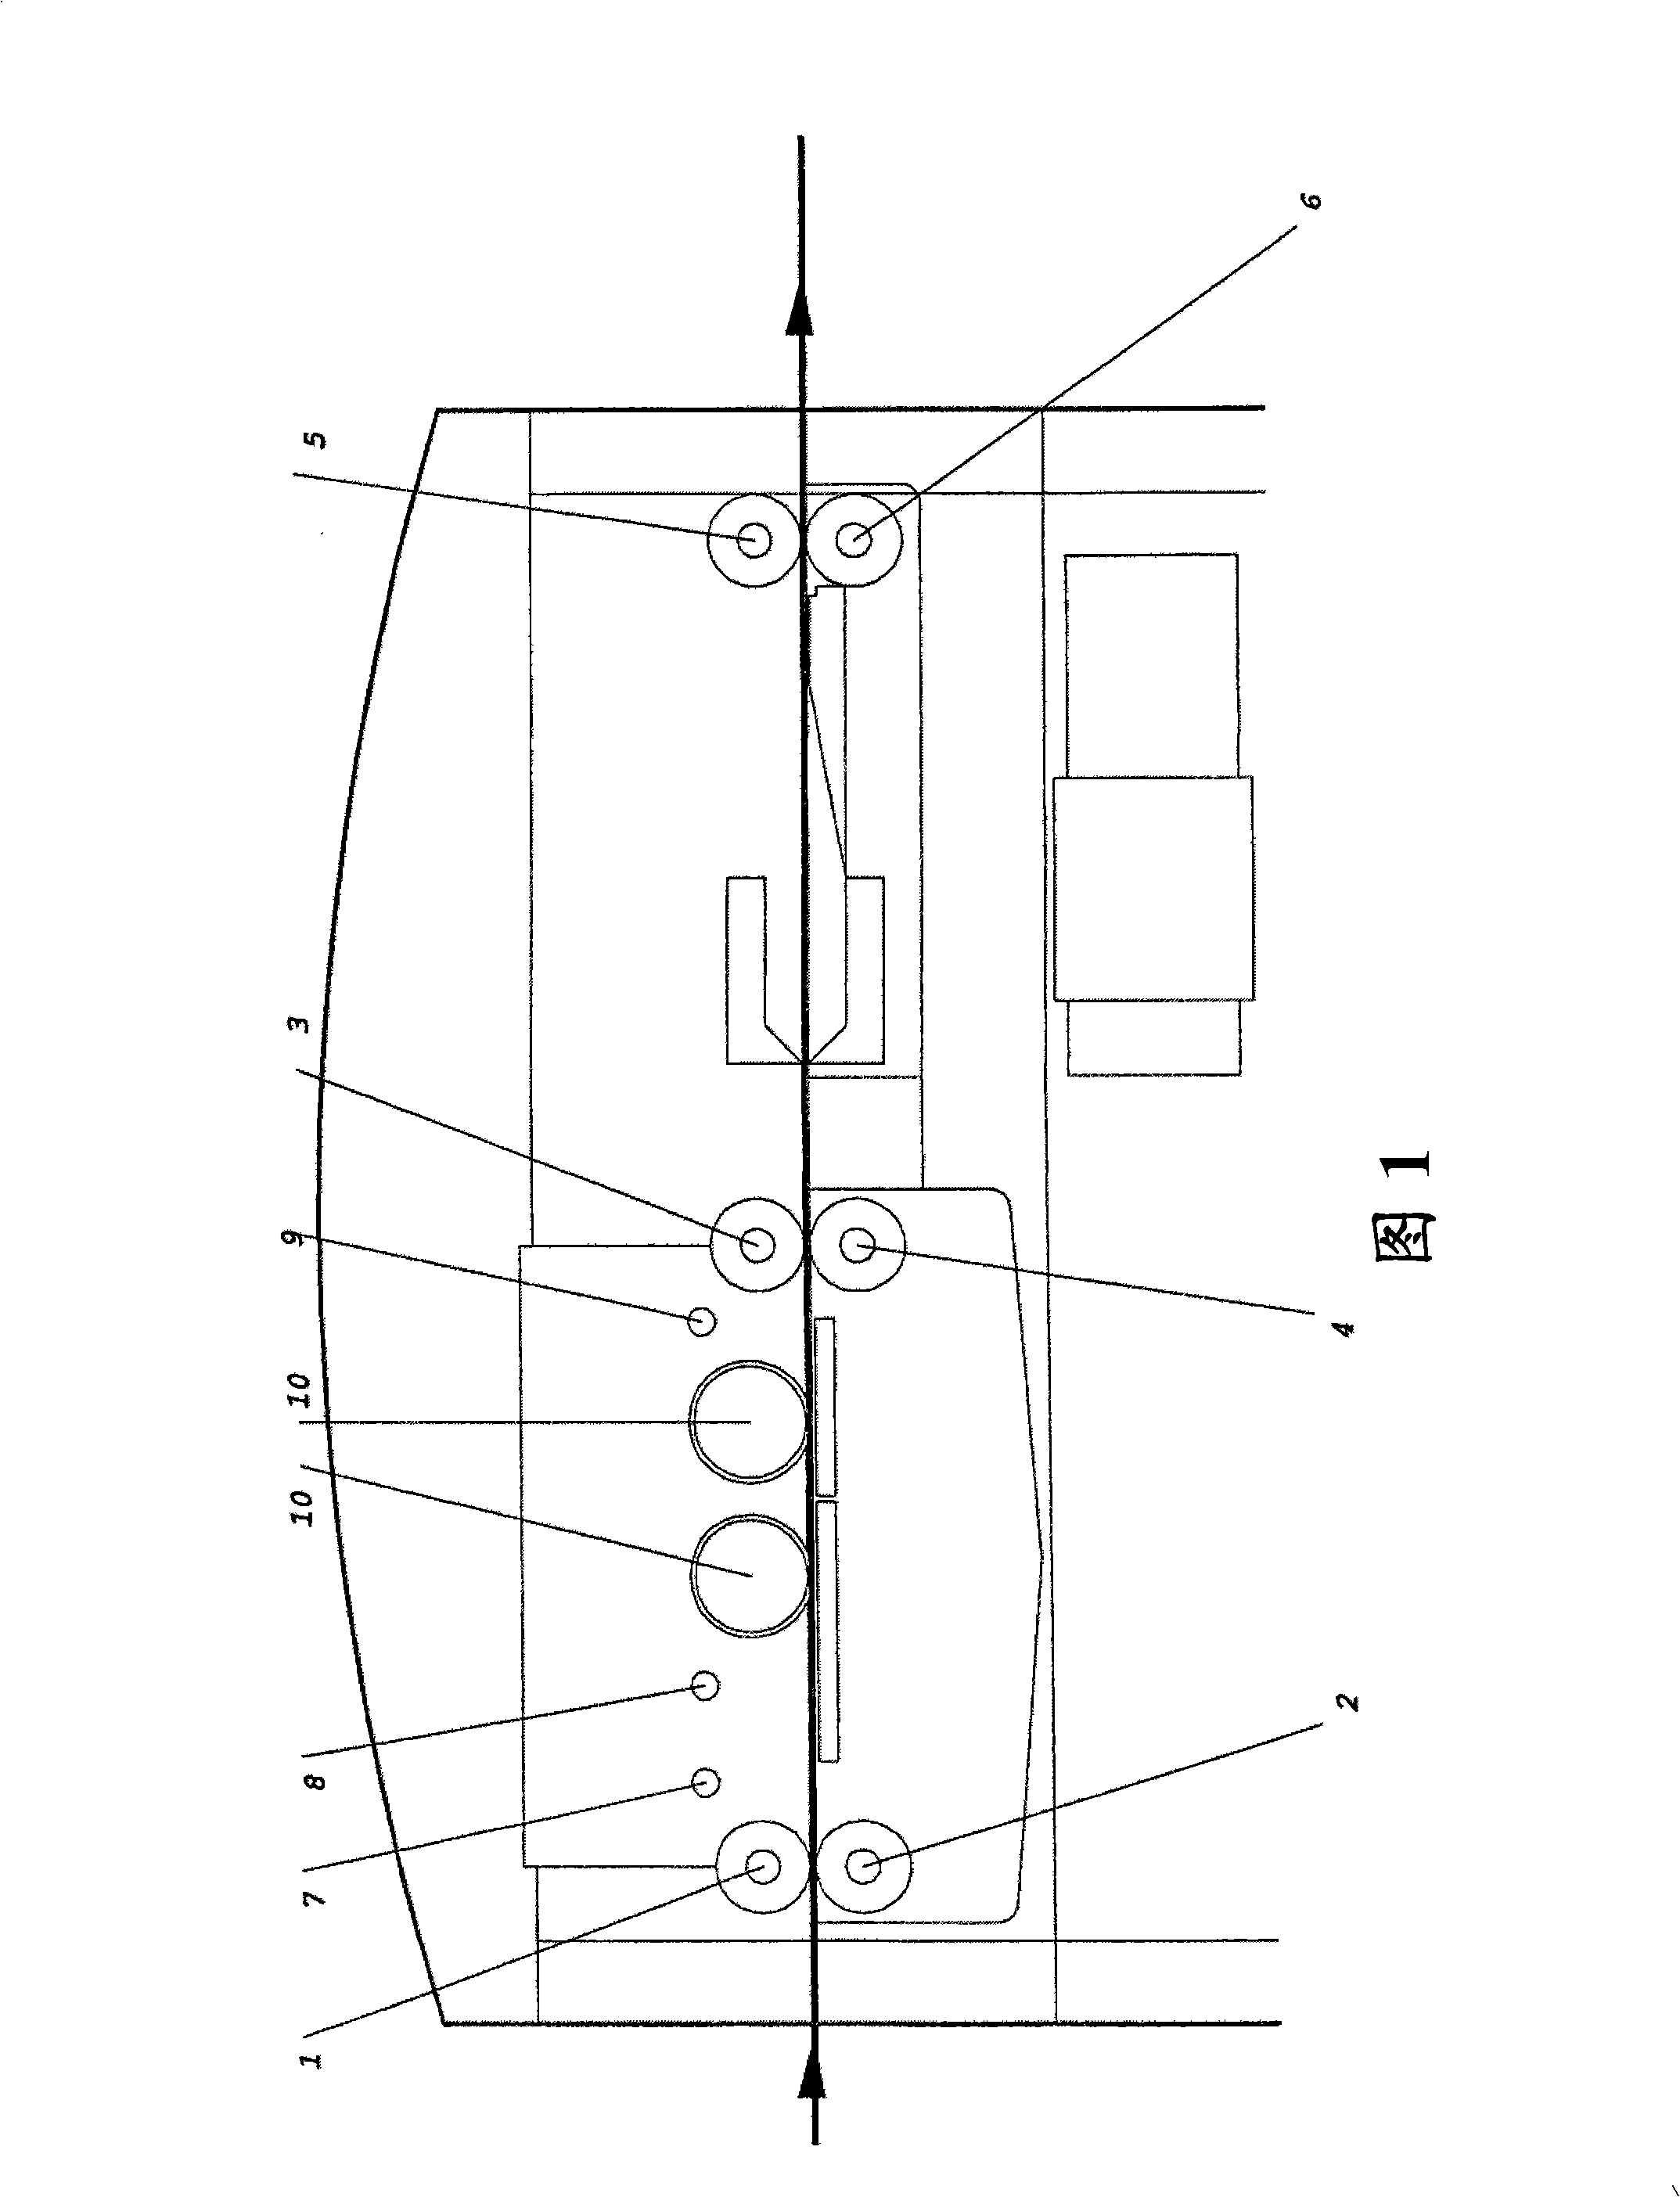 Method for making a lithographic printing plate